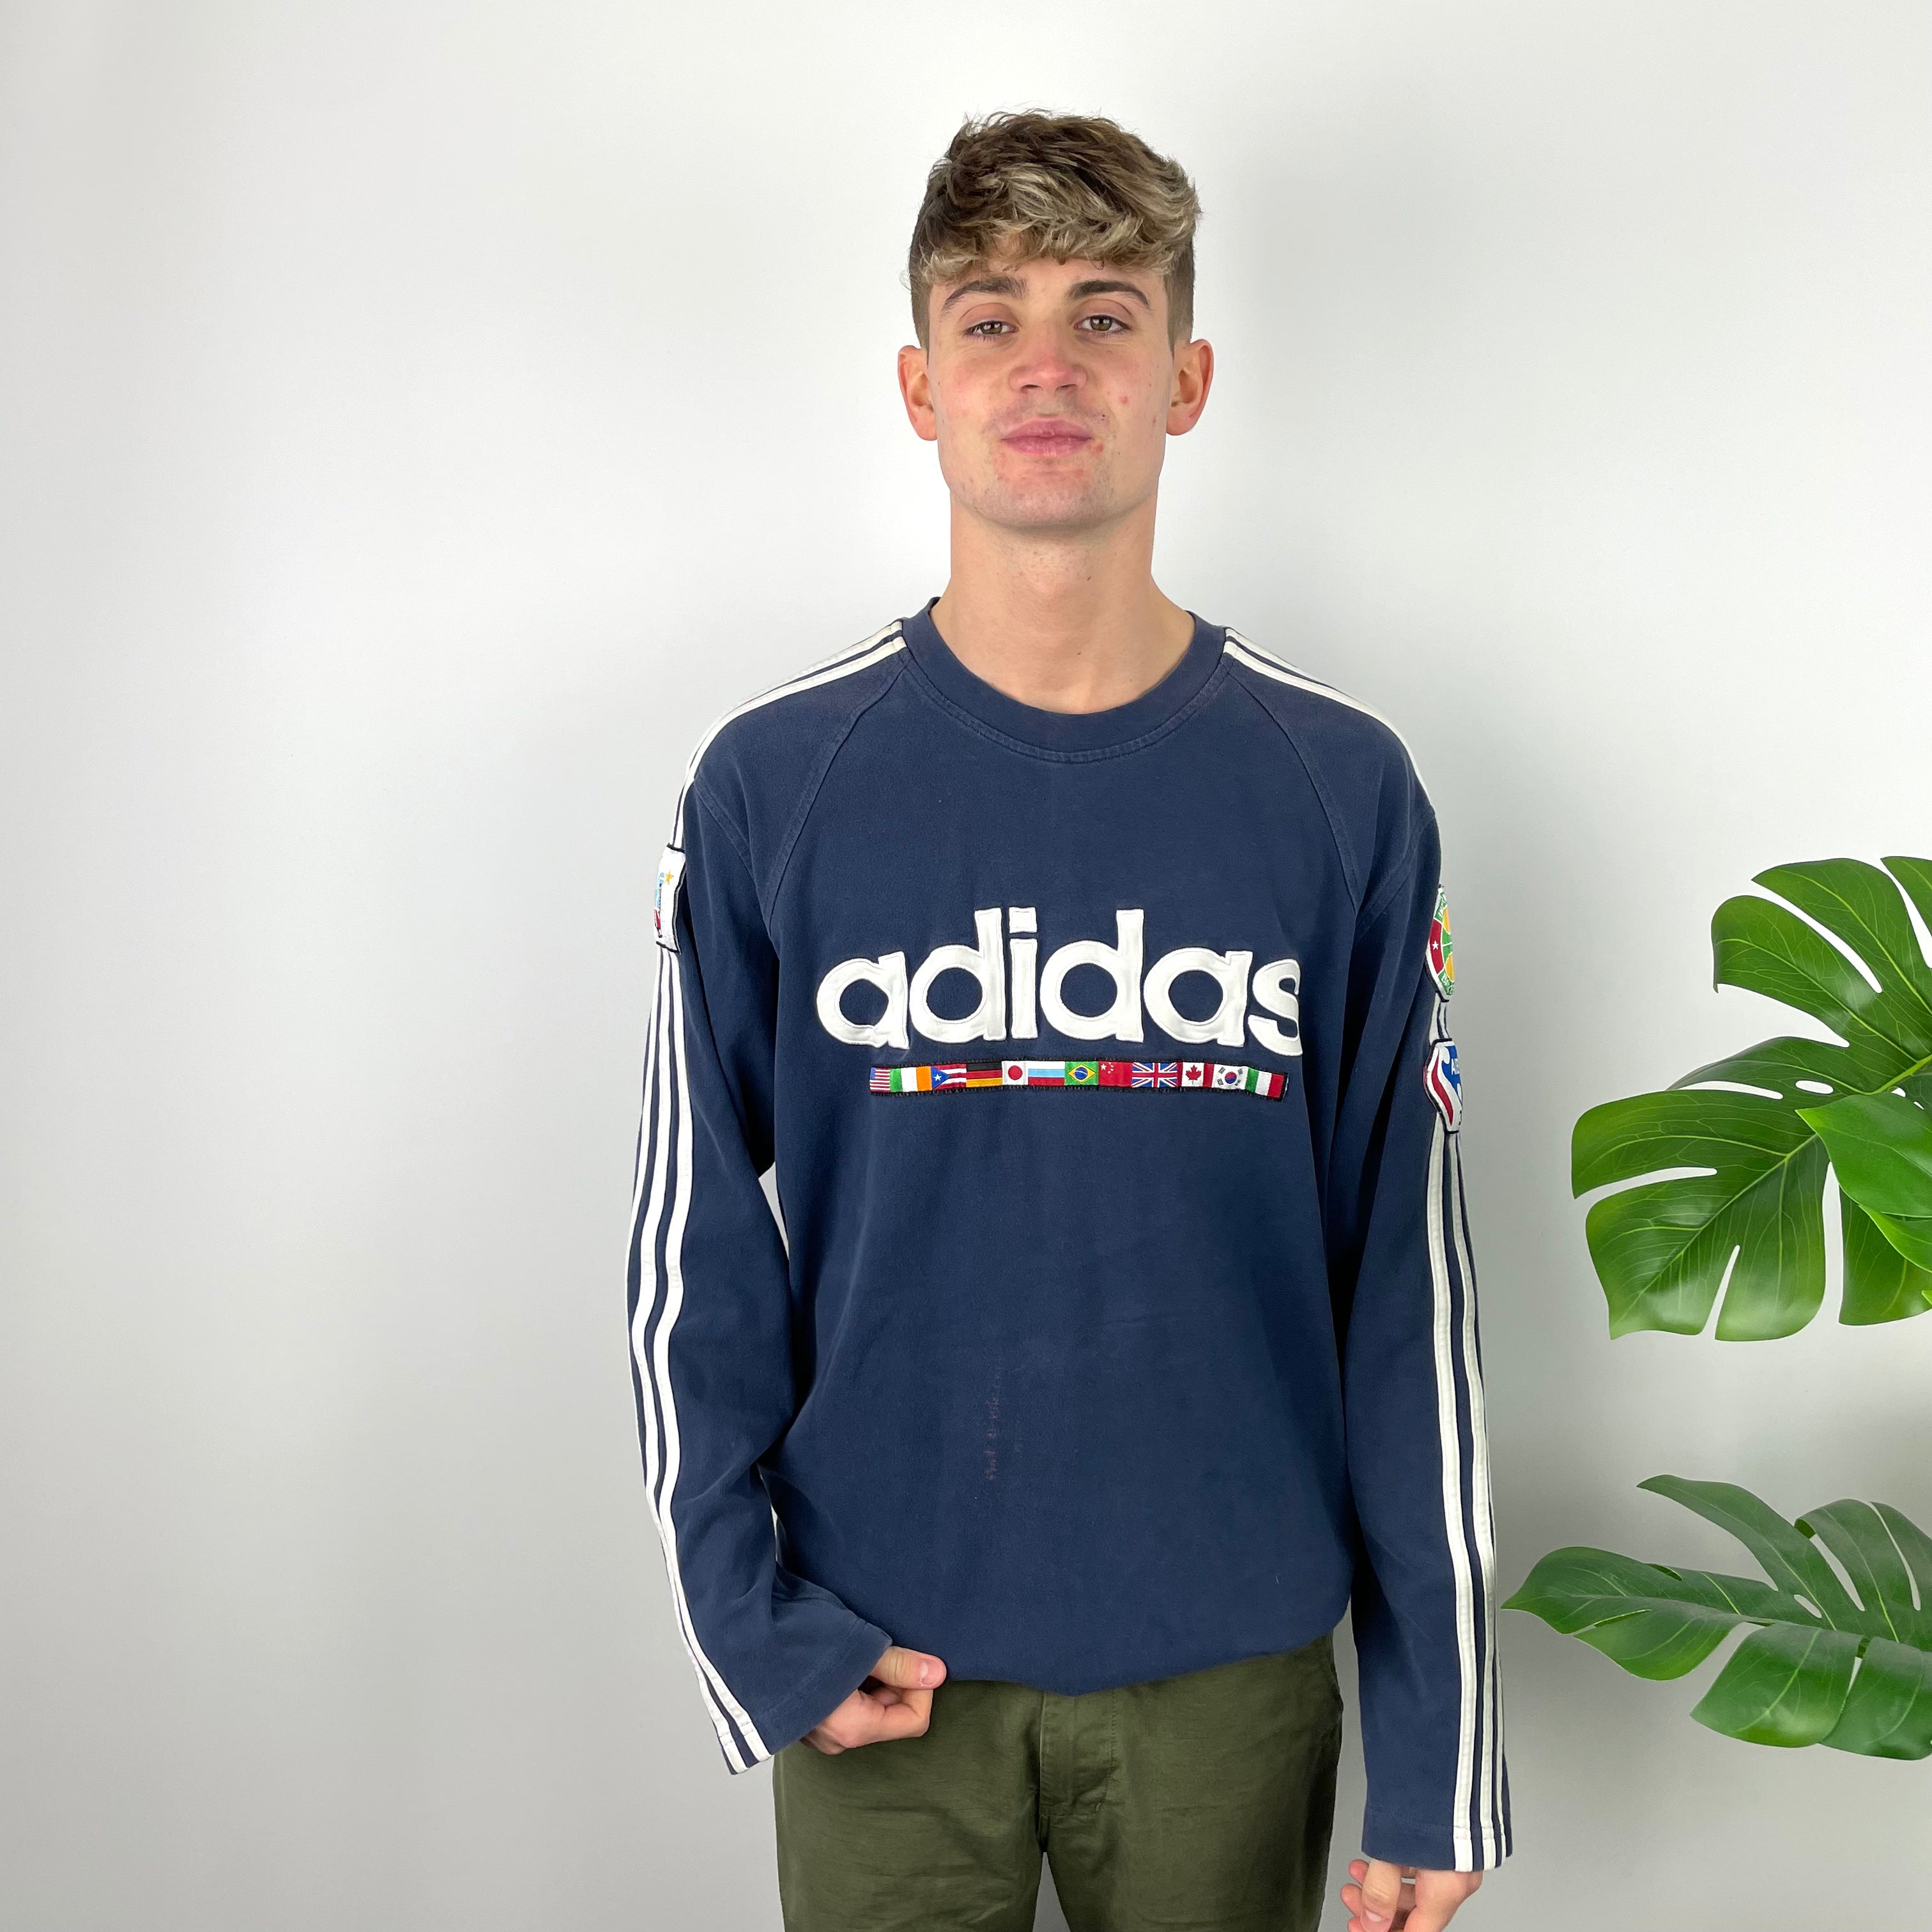 Adidas RARE Navy Embroidered Spell Out Sweatshirt (XL)